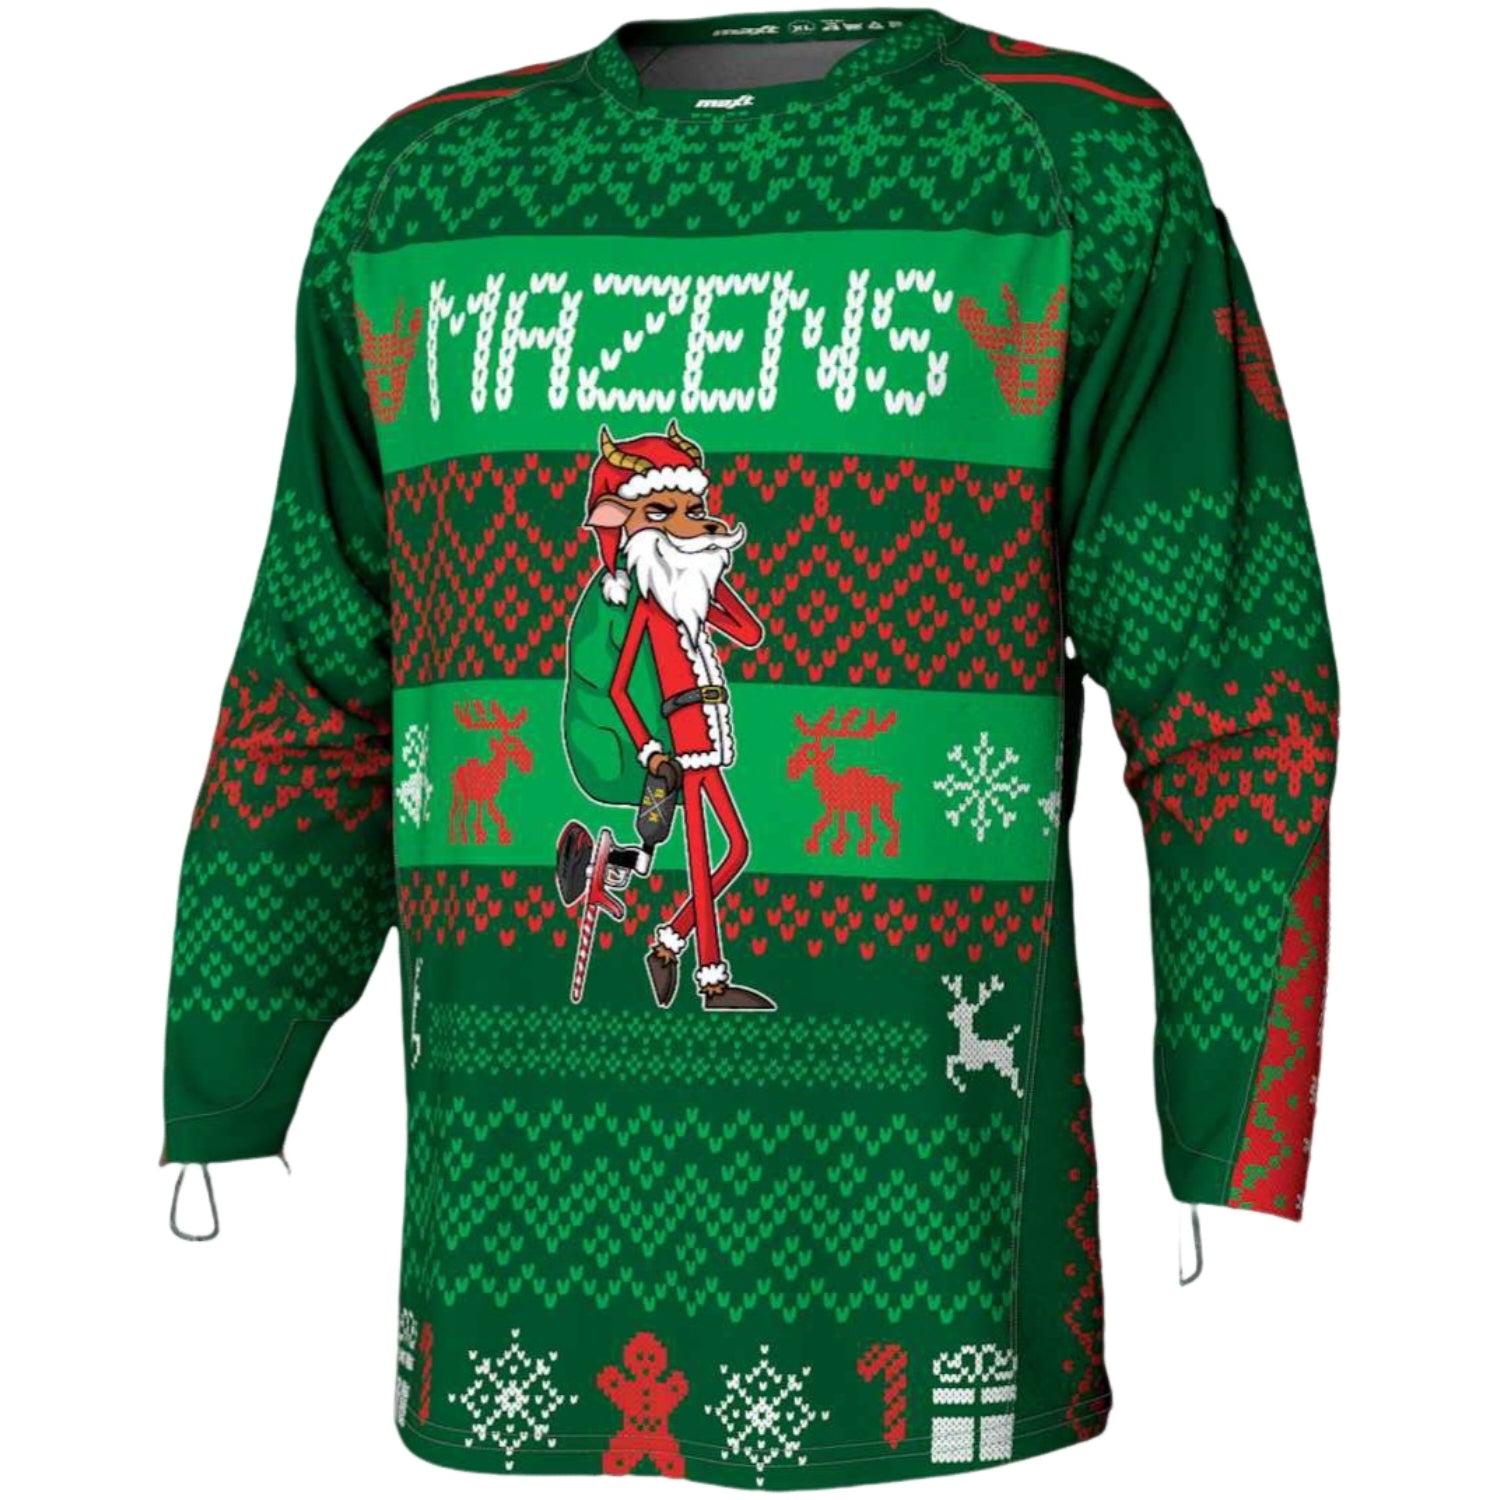 Mazens "Ugly Christmas Sweater" Jersey - All Sizes